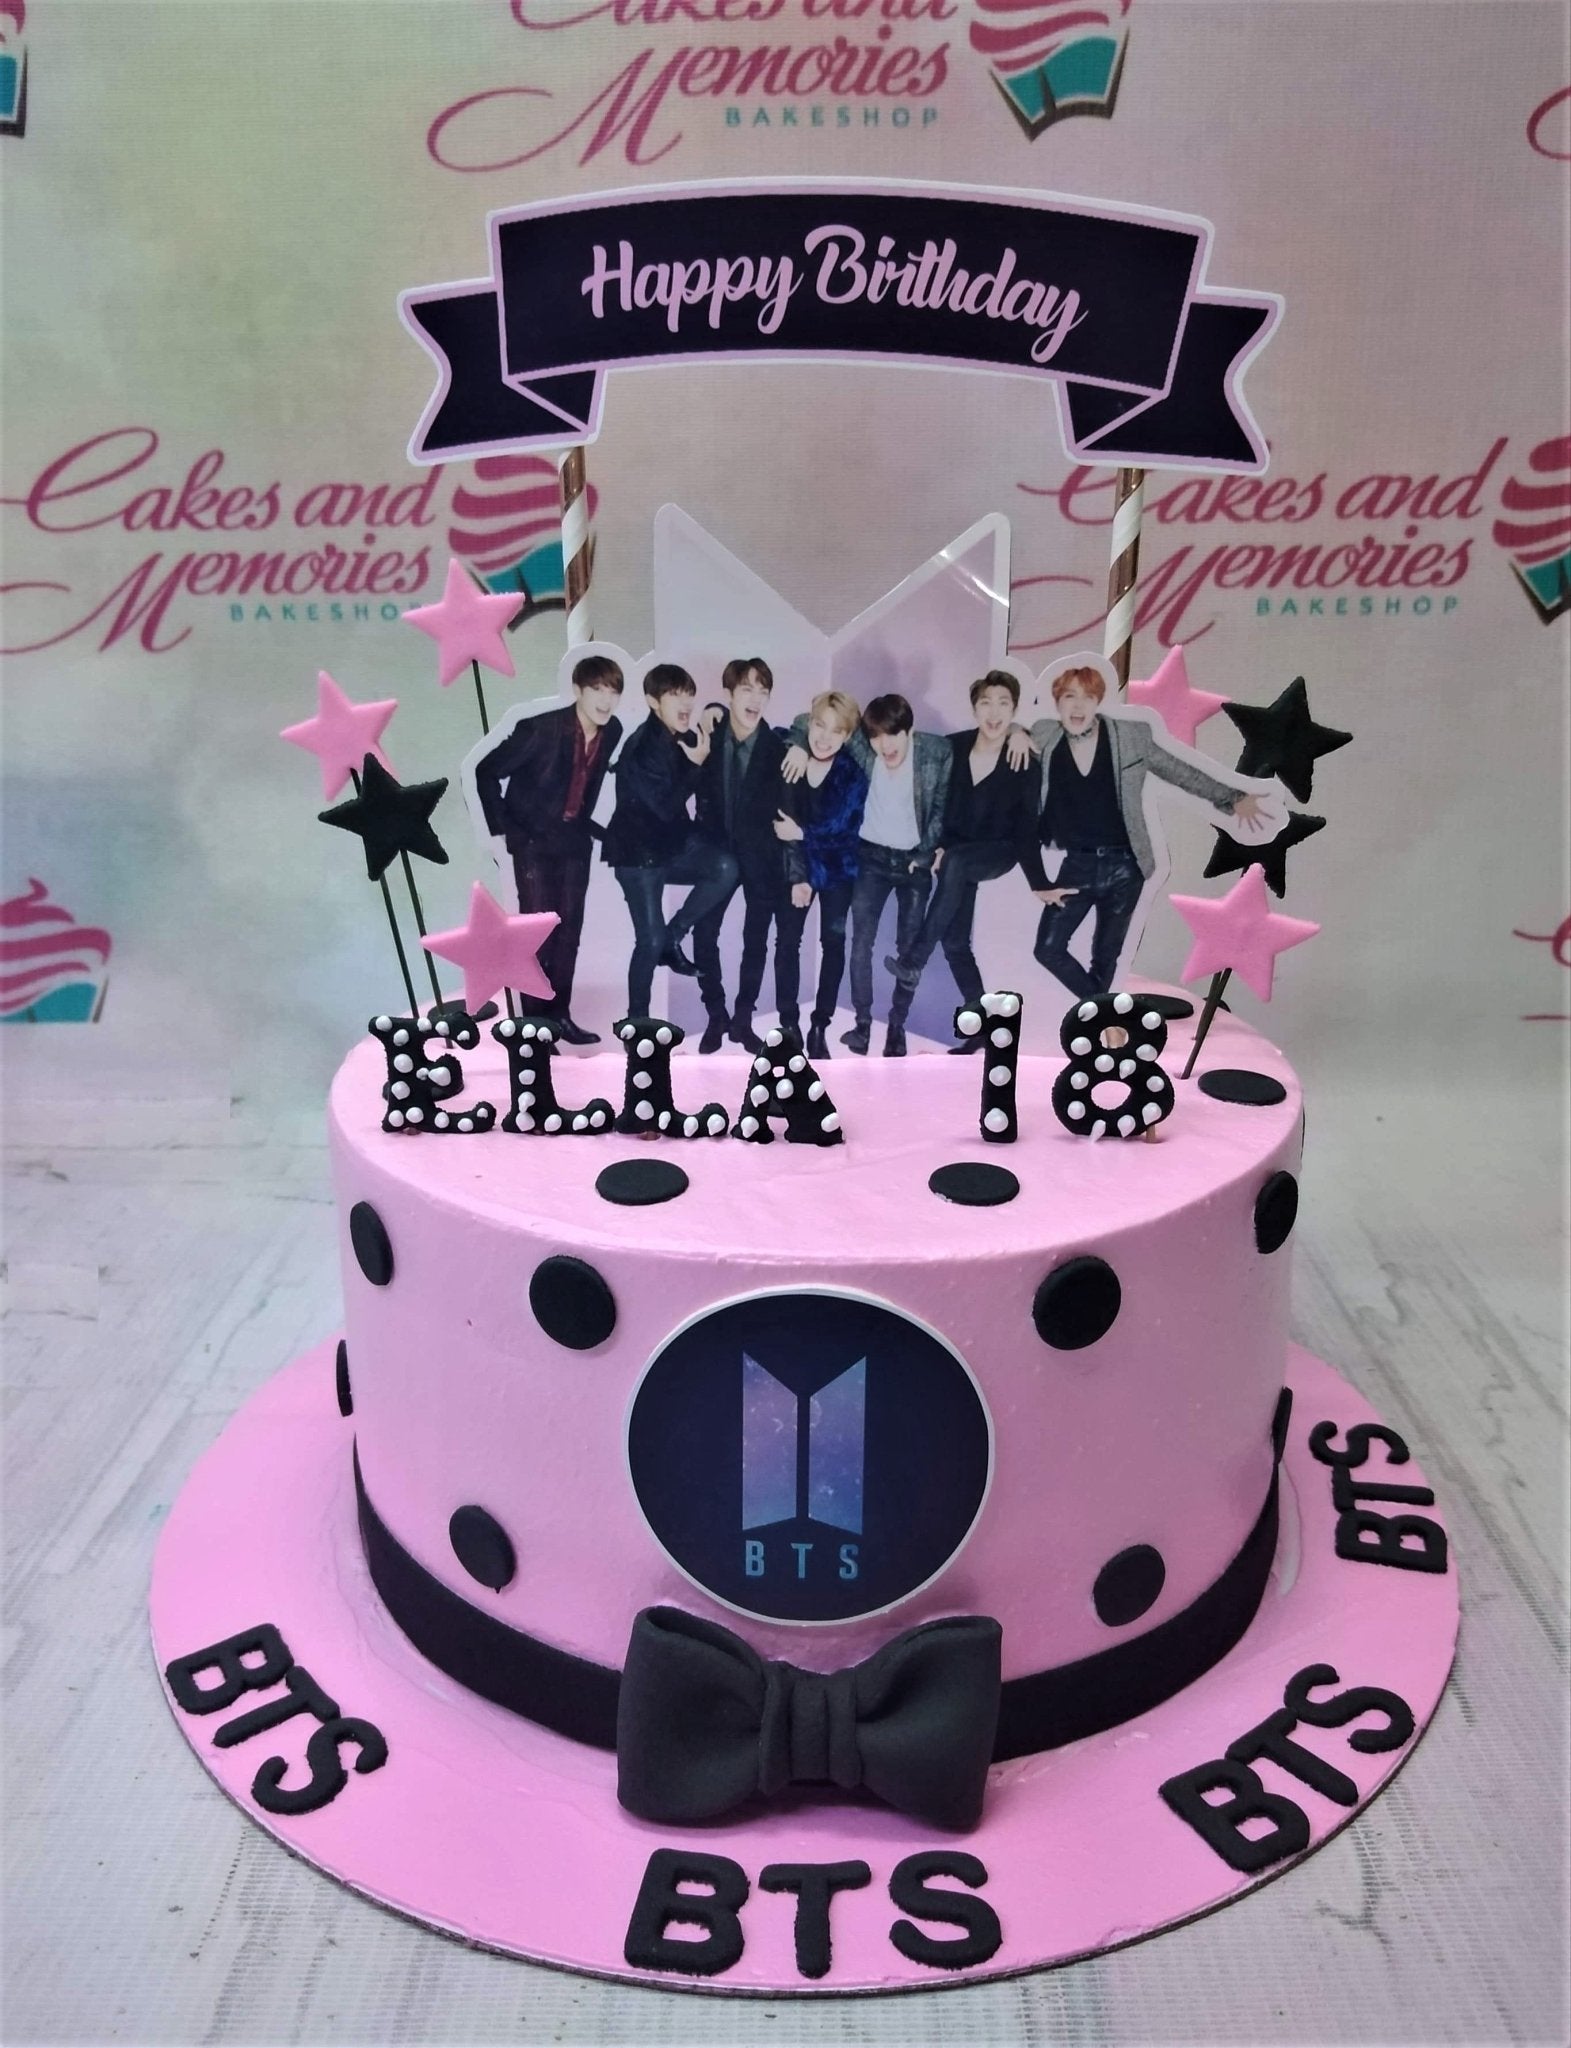 BTS Birthday Party Decorations, Kpop Birthday Supplies for Bangtan Boys  Fans Include BTS Happy Birthday Banner Cake Toppers Balloons | Walmart  Canada